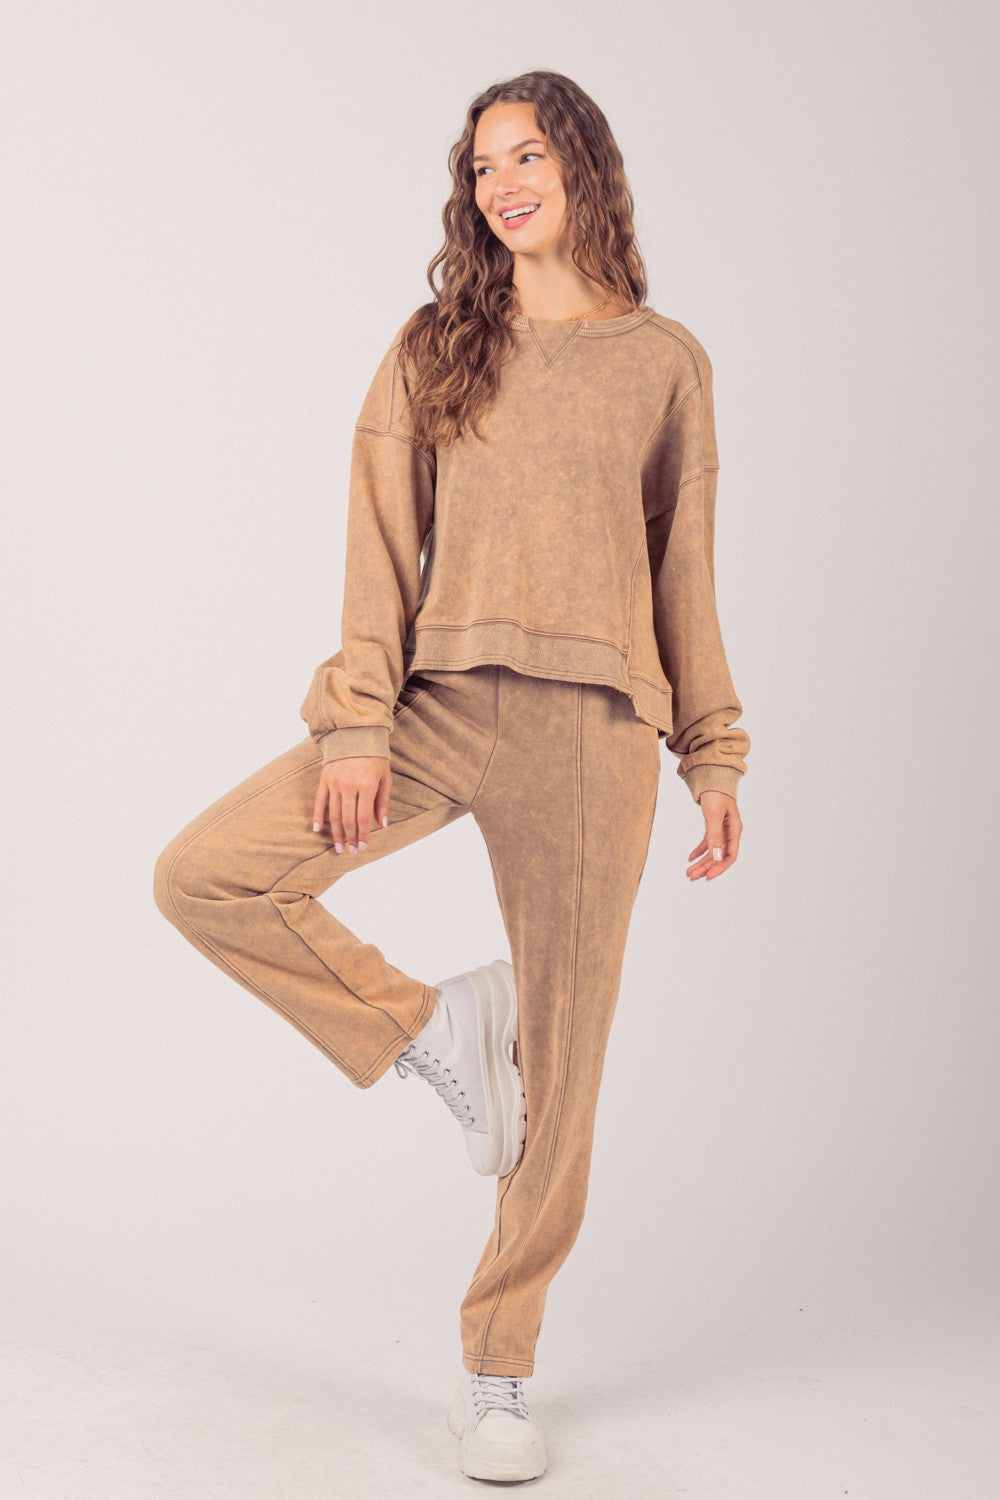 Mineral washed knit top and pant set